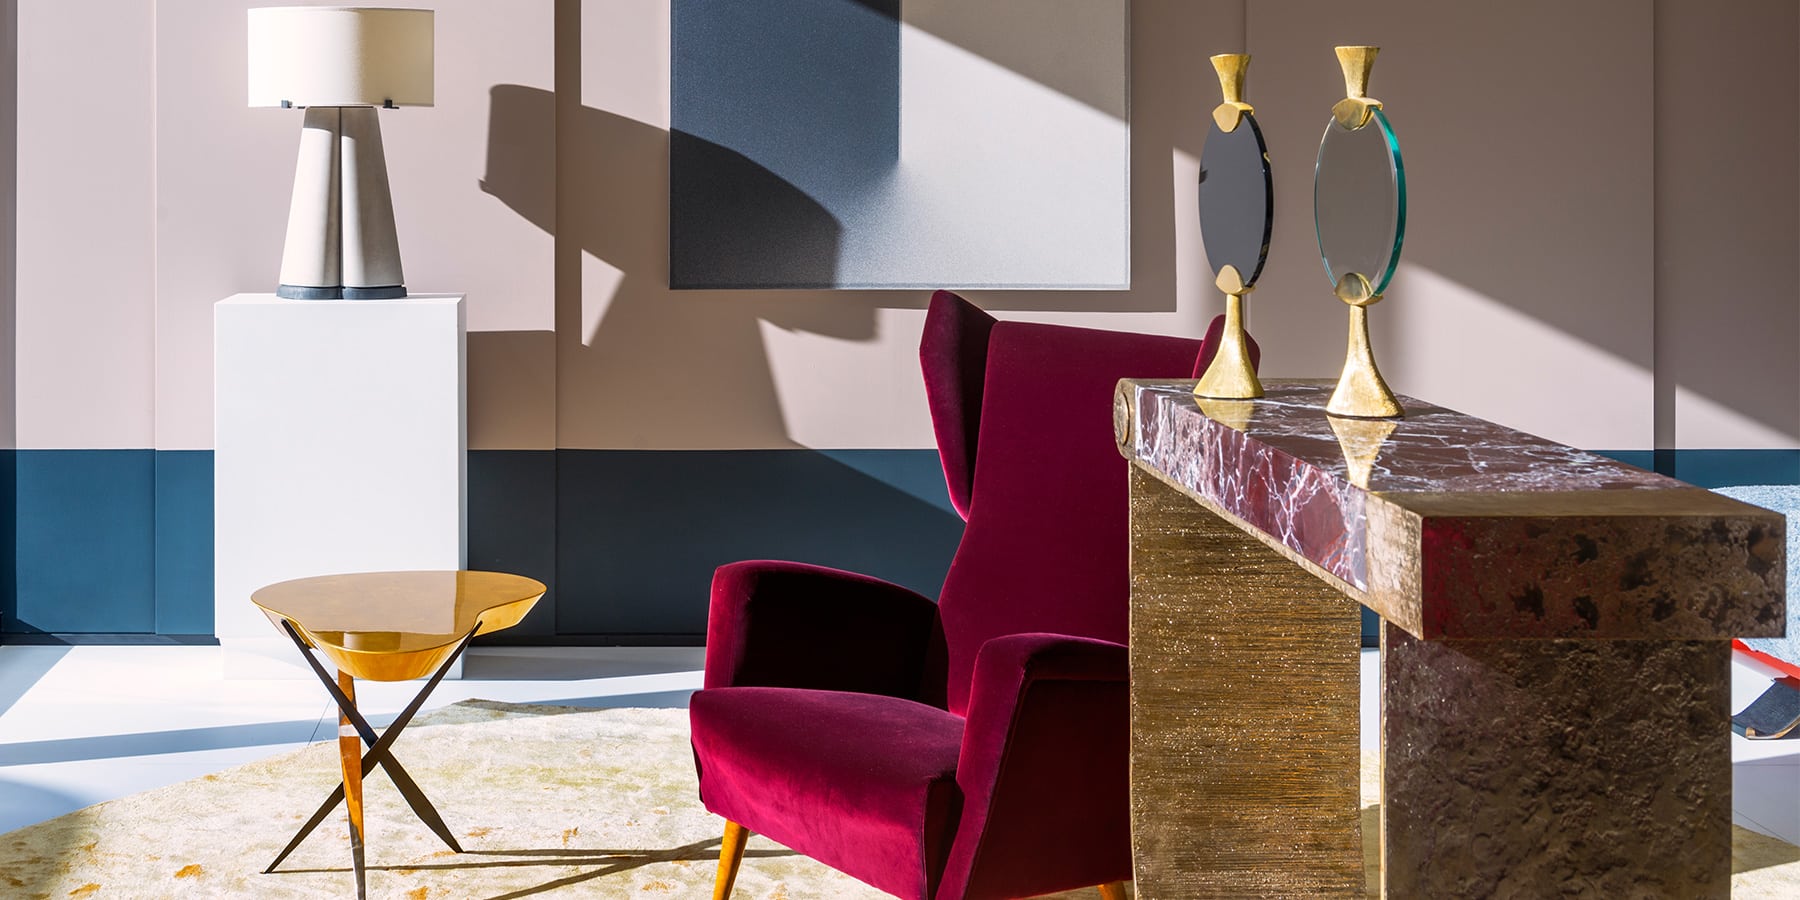 Achille Salvagni’s Edgy Interiors Are Infused with Traditional Italian Design